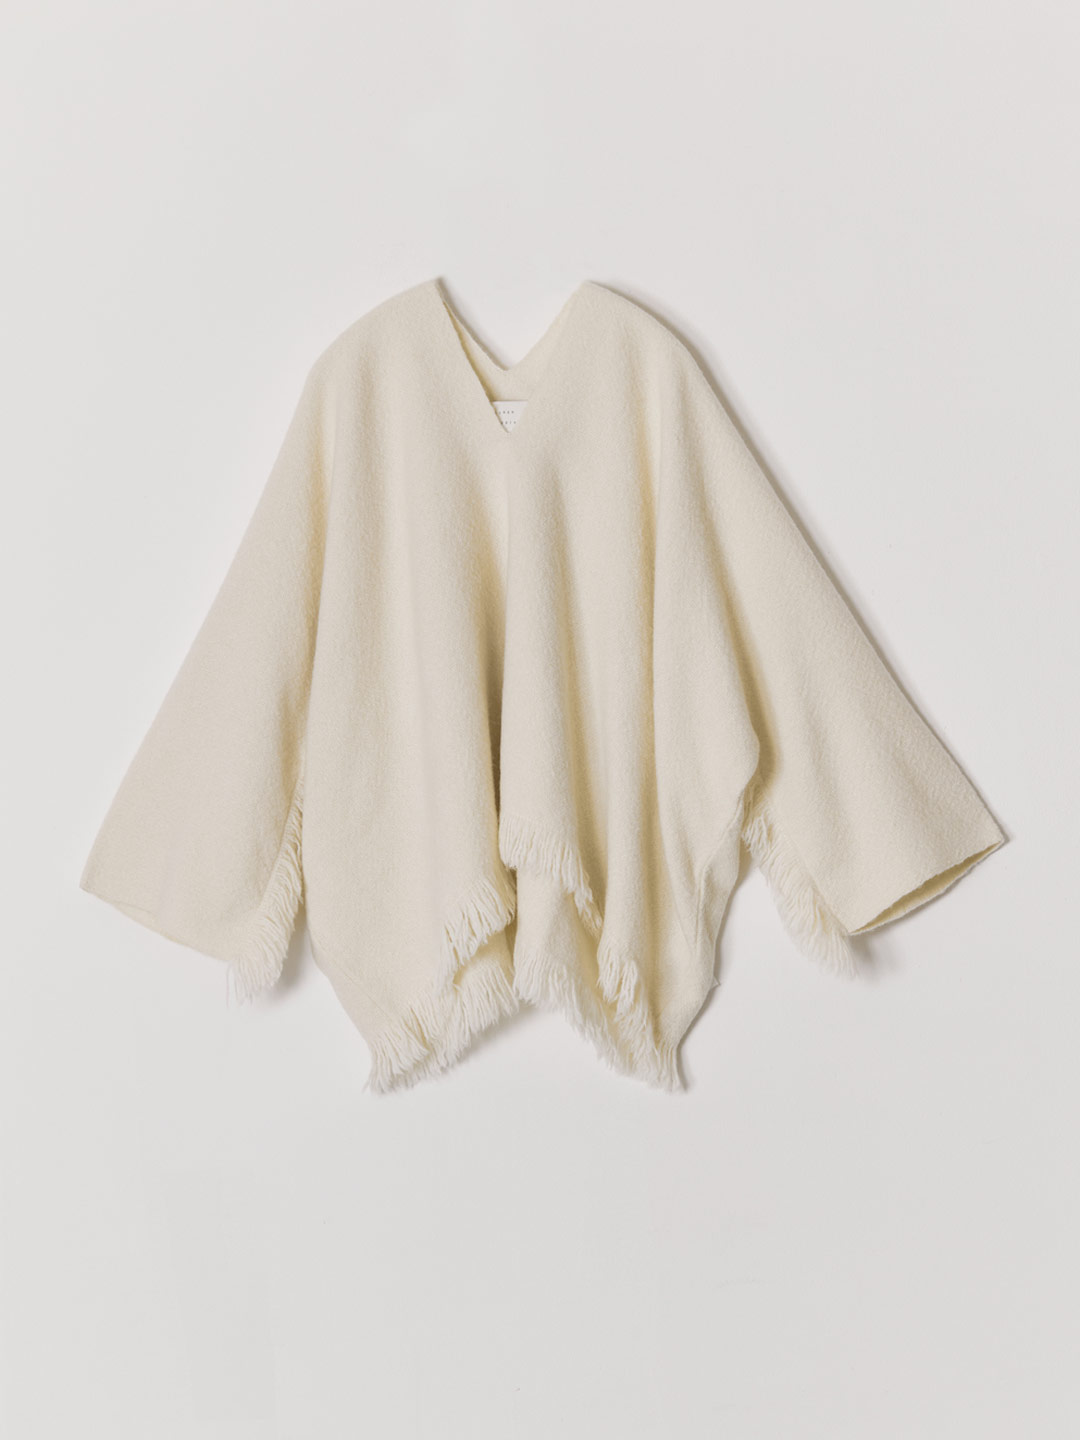 Handwoven Wide Top - White